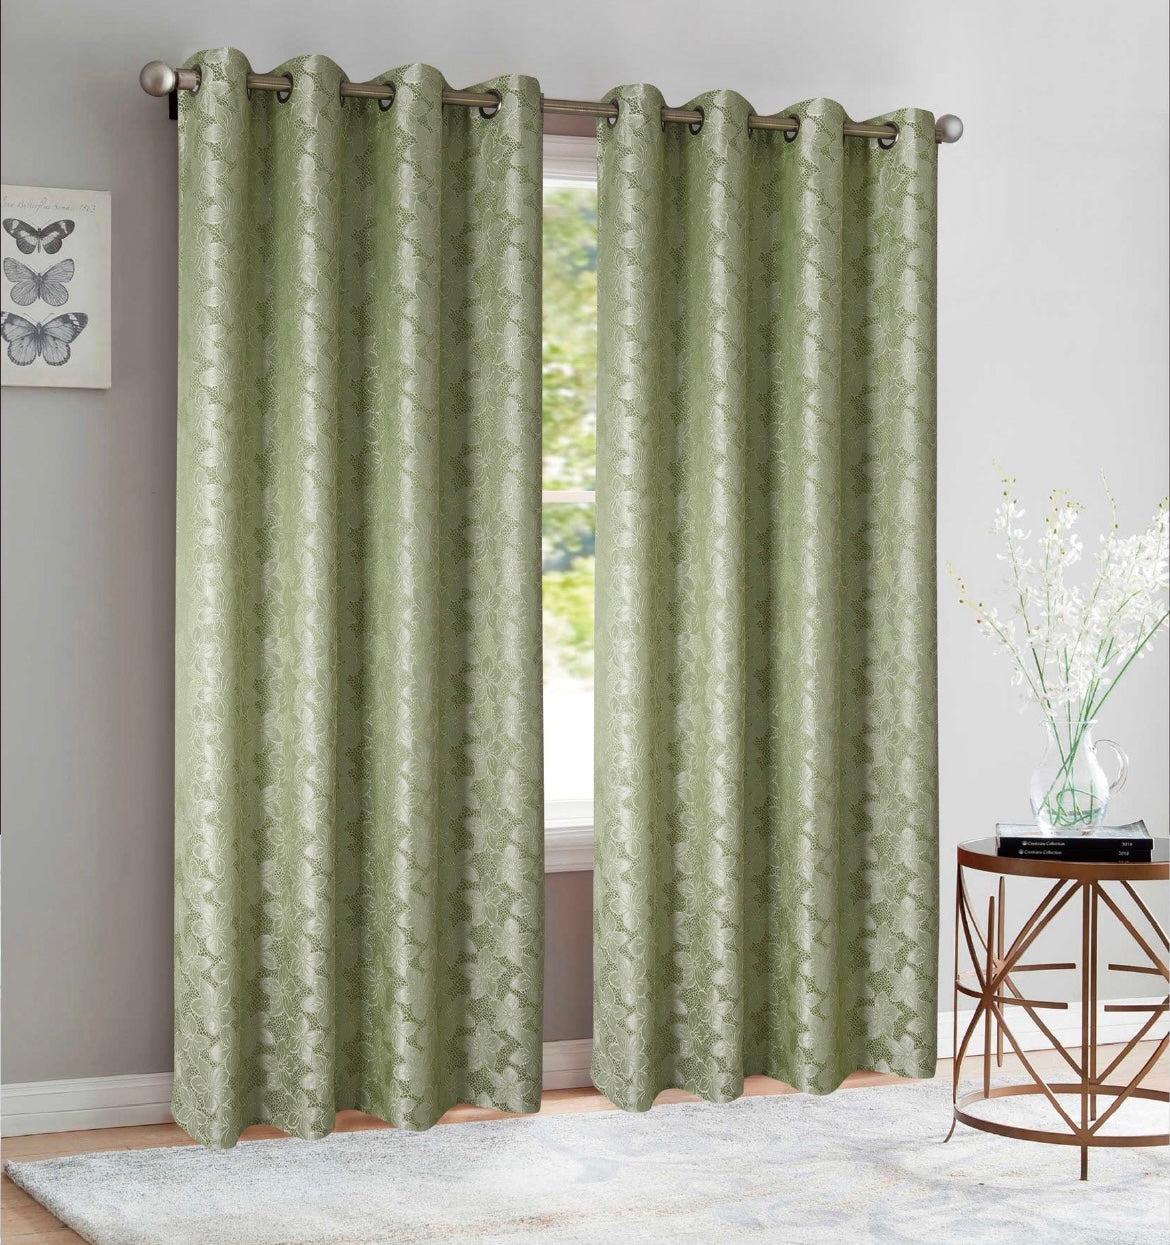 Linen World Sage / 63” Jolene Jacquard Curtain Panel with Grommets in 63" and 84"